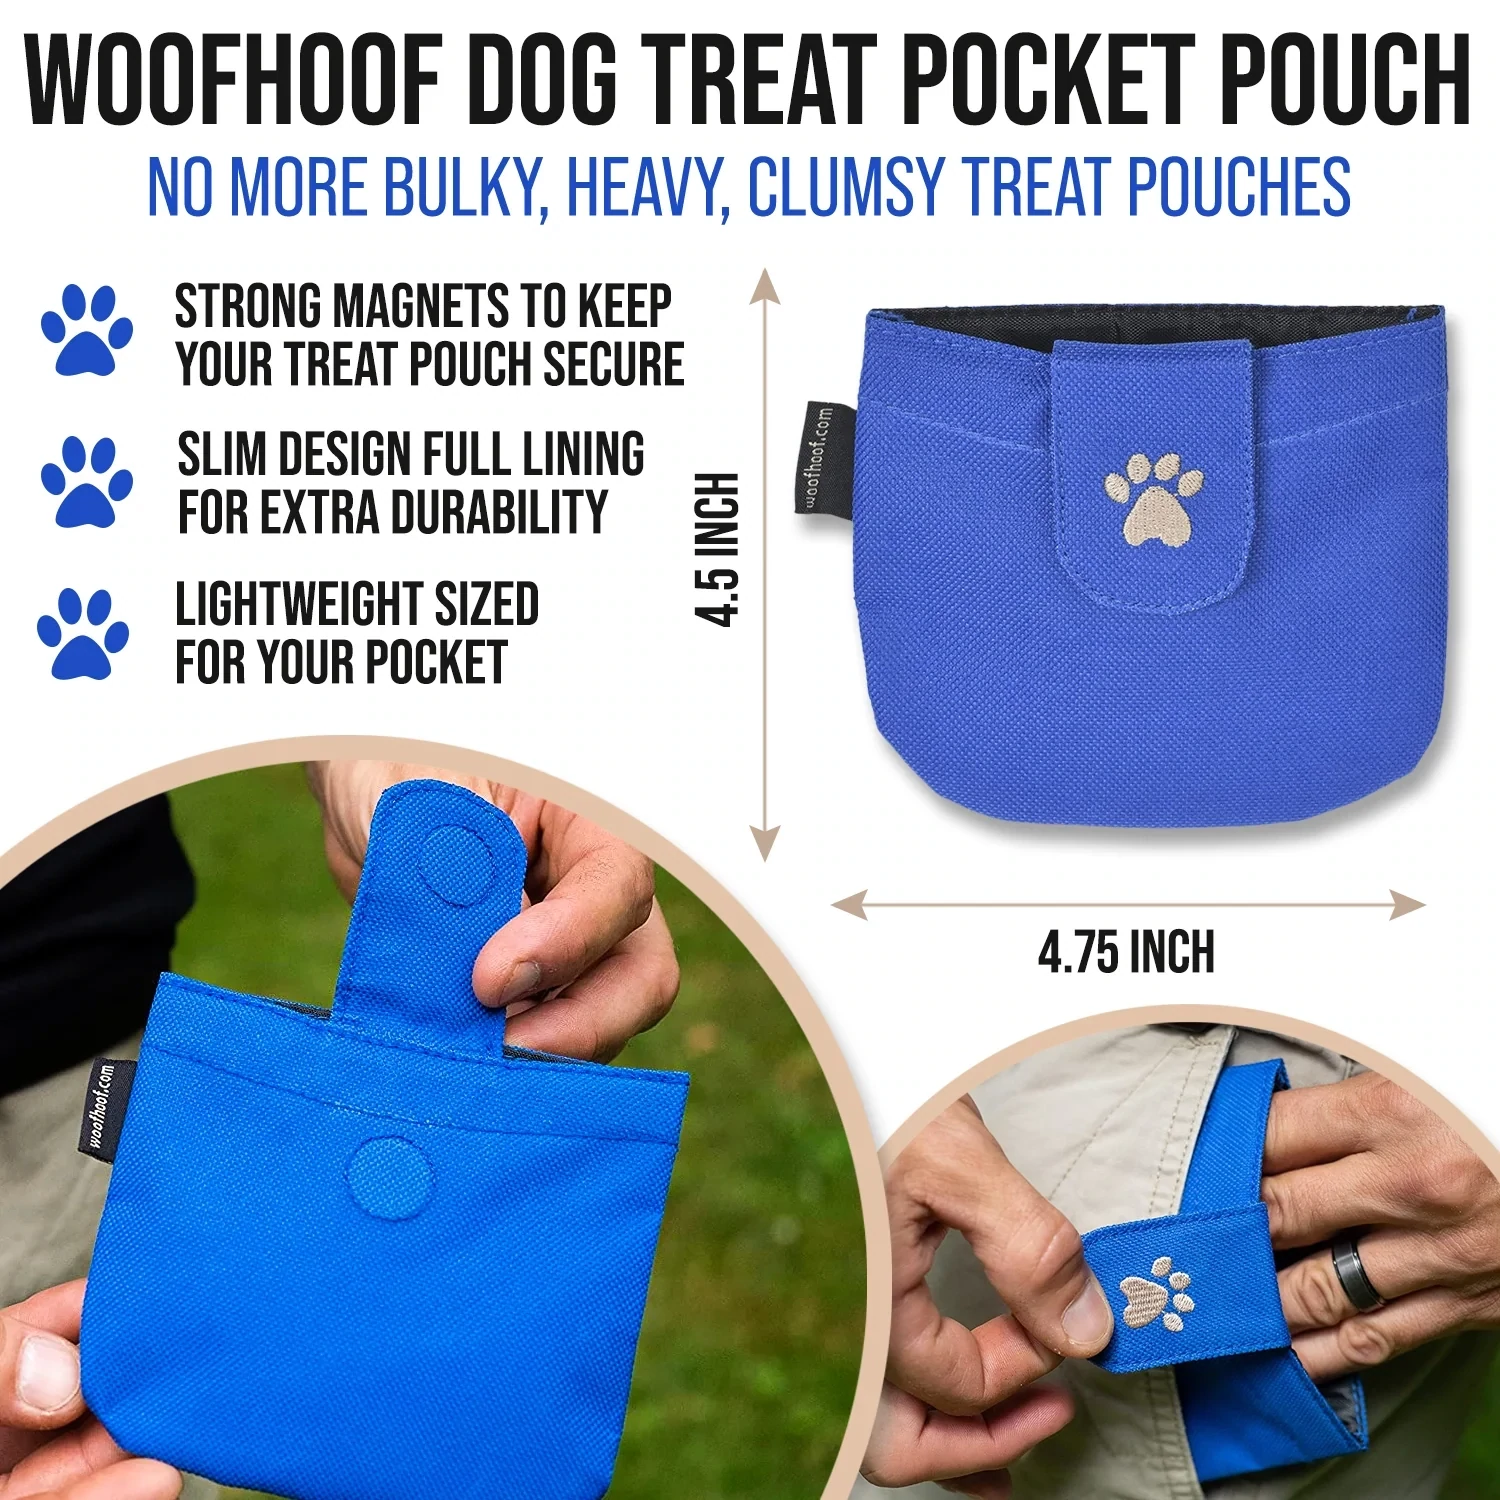 Dog Treat Pocket Pouch from Woof Hoof